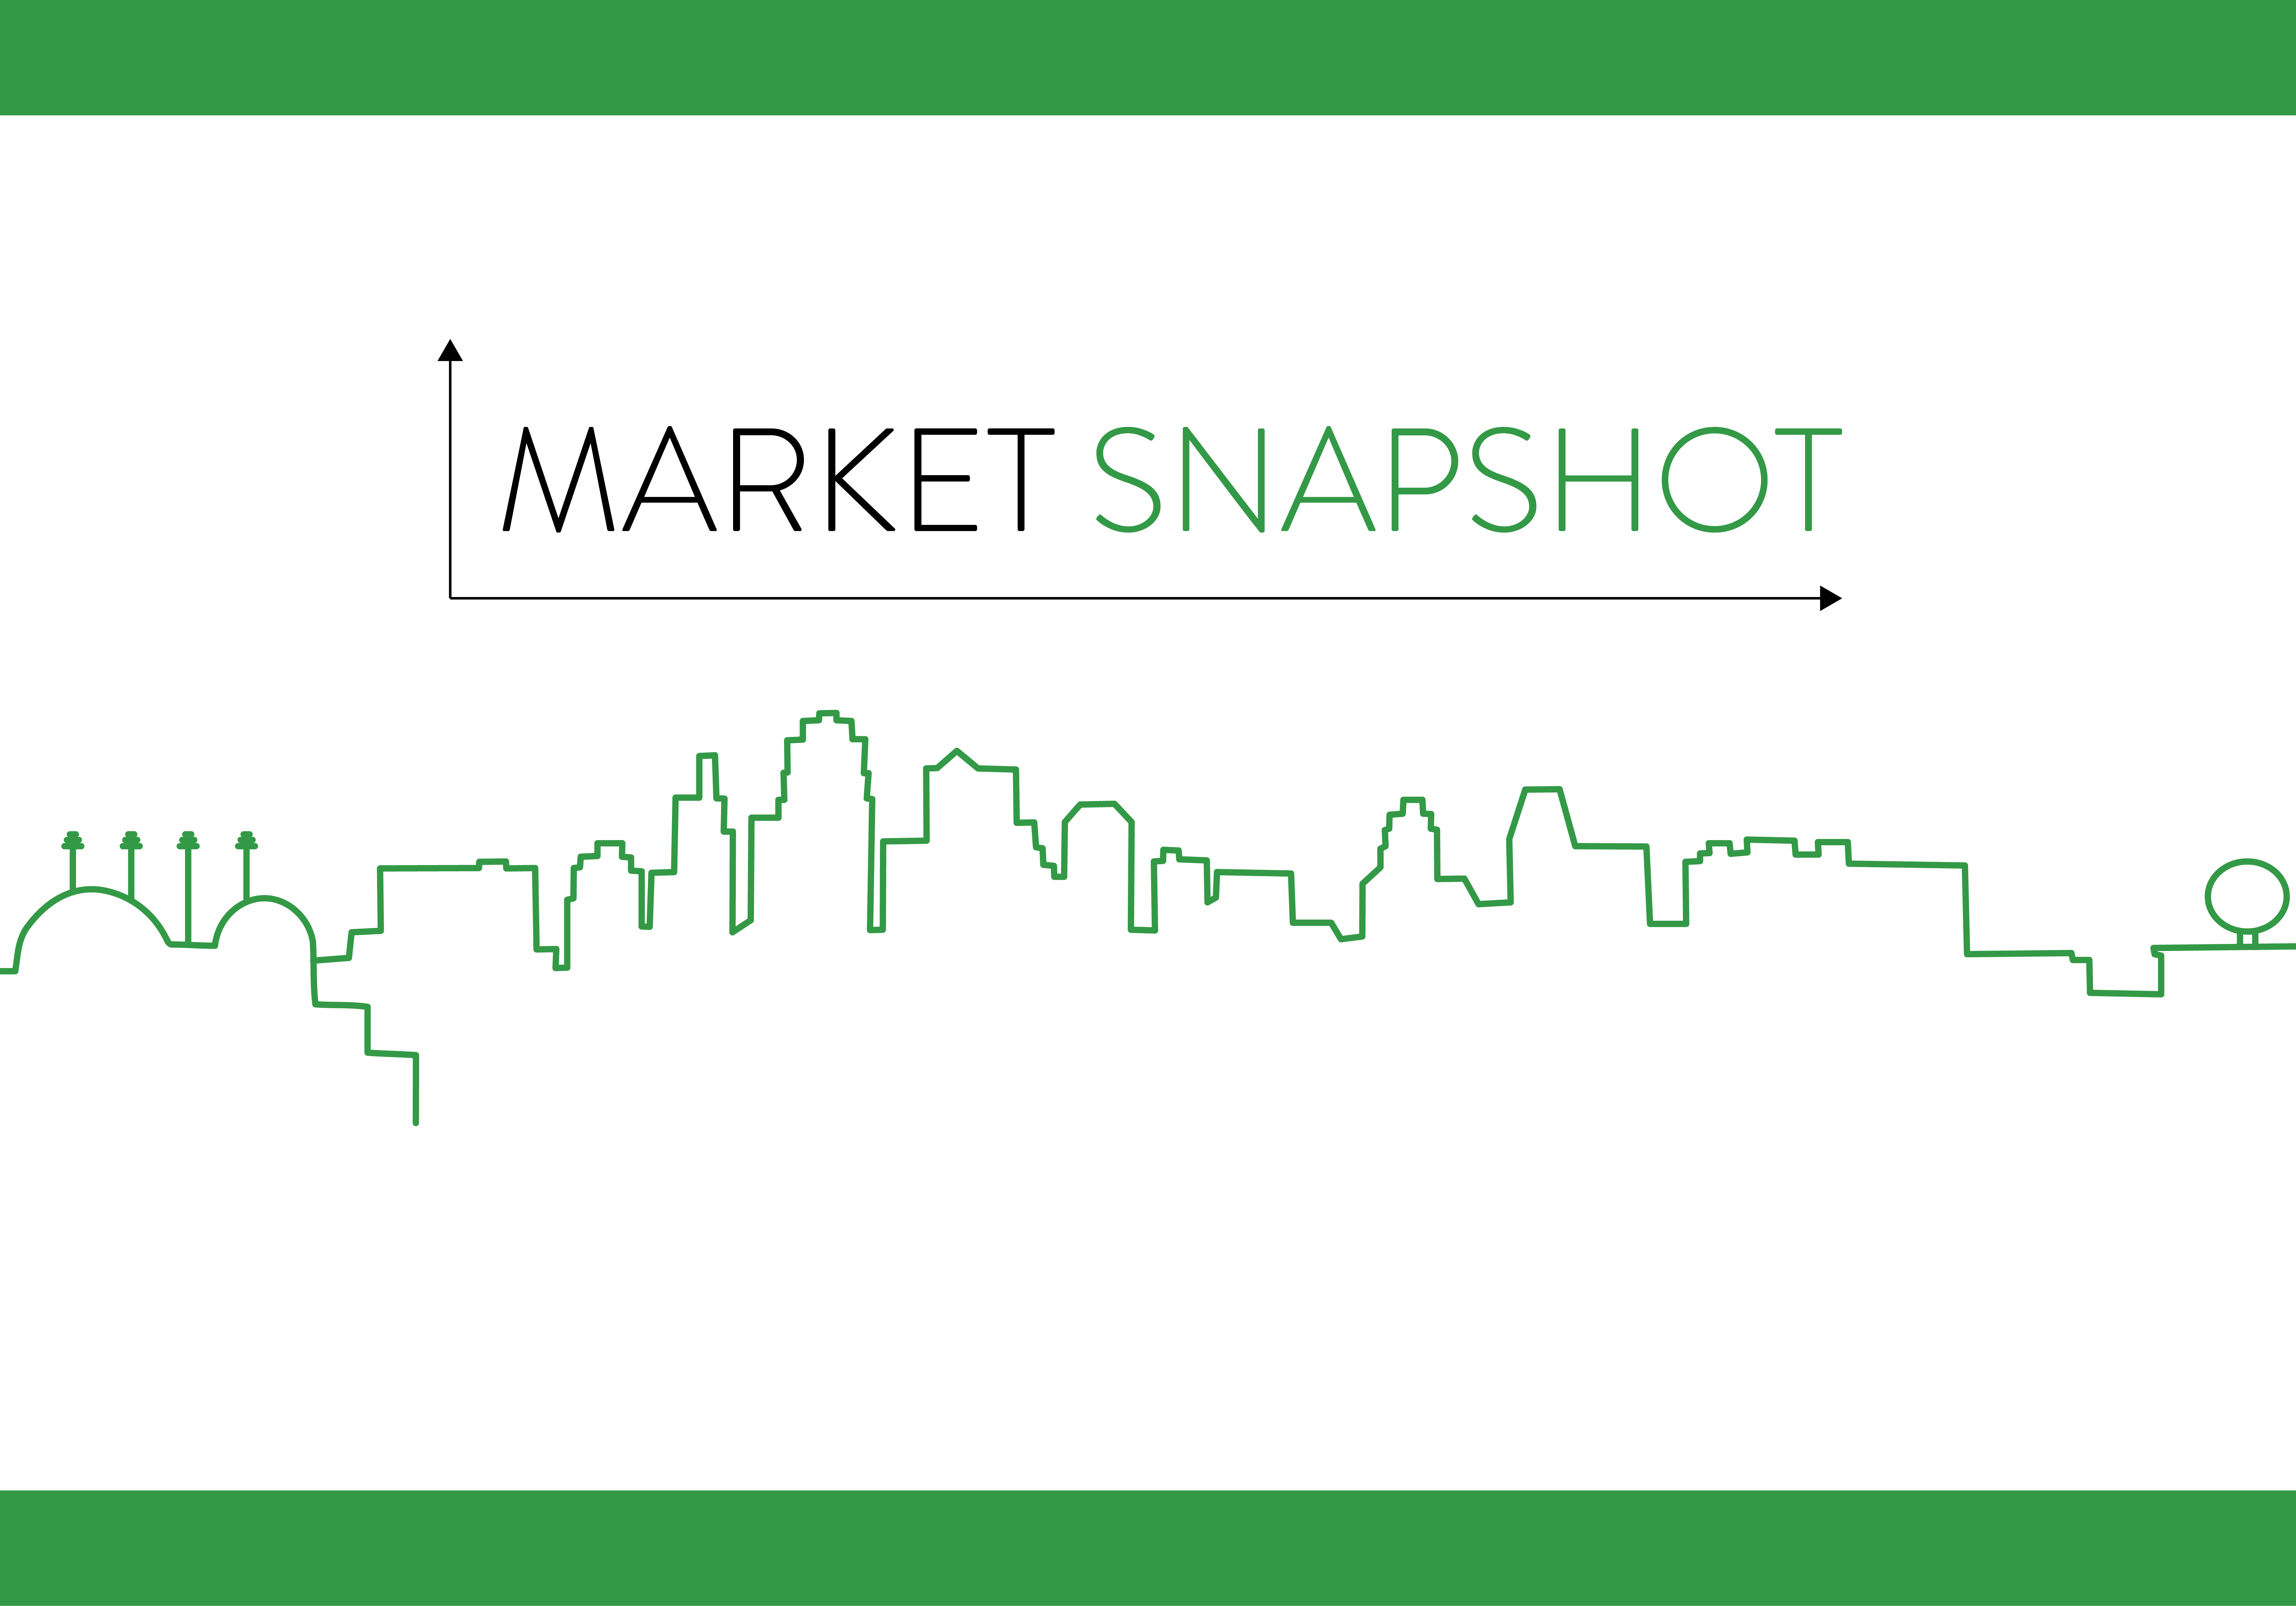 Vector graphic showing Kansas City skyline in green line with words "Market Snapshot" above